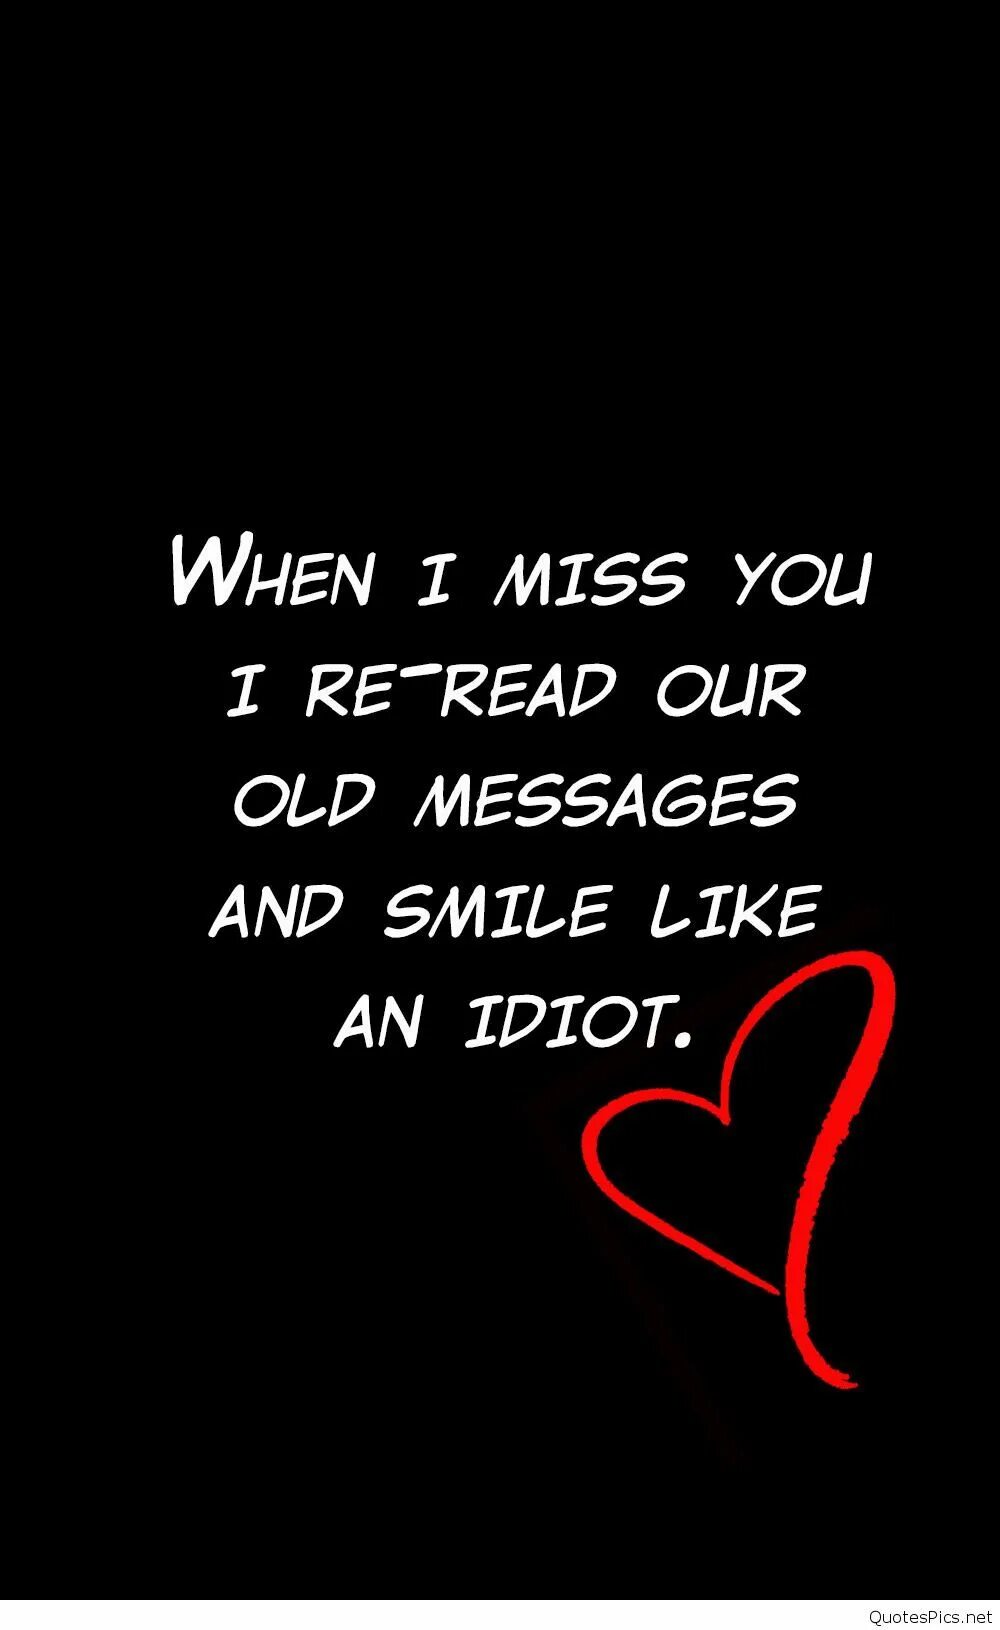 Old messages. I Miss you. I Miss you обои. Miss tou. Miss me.